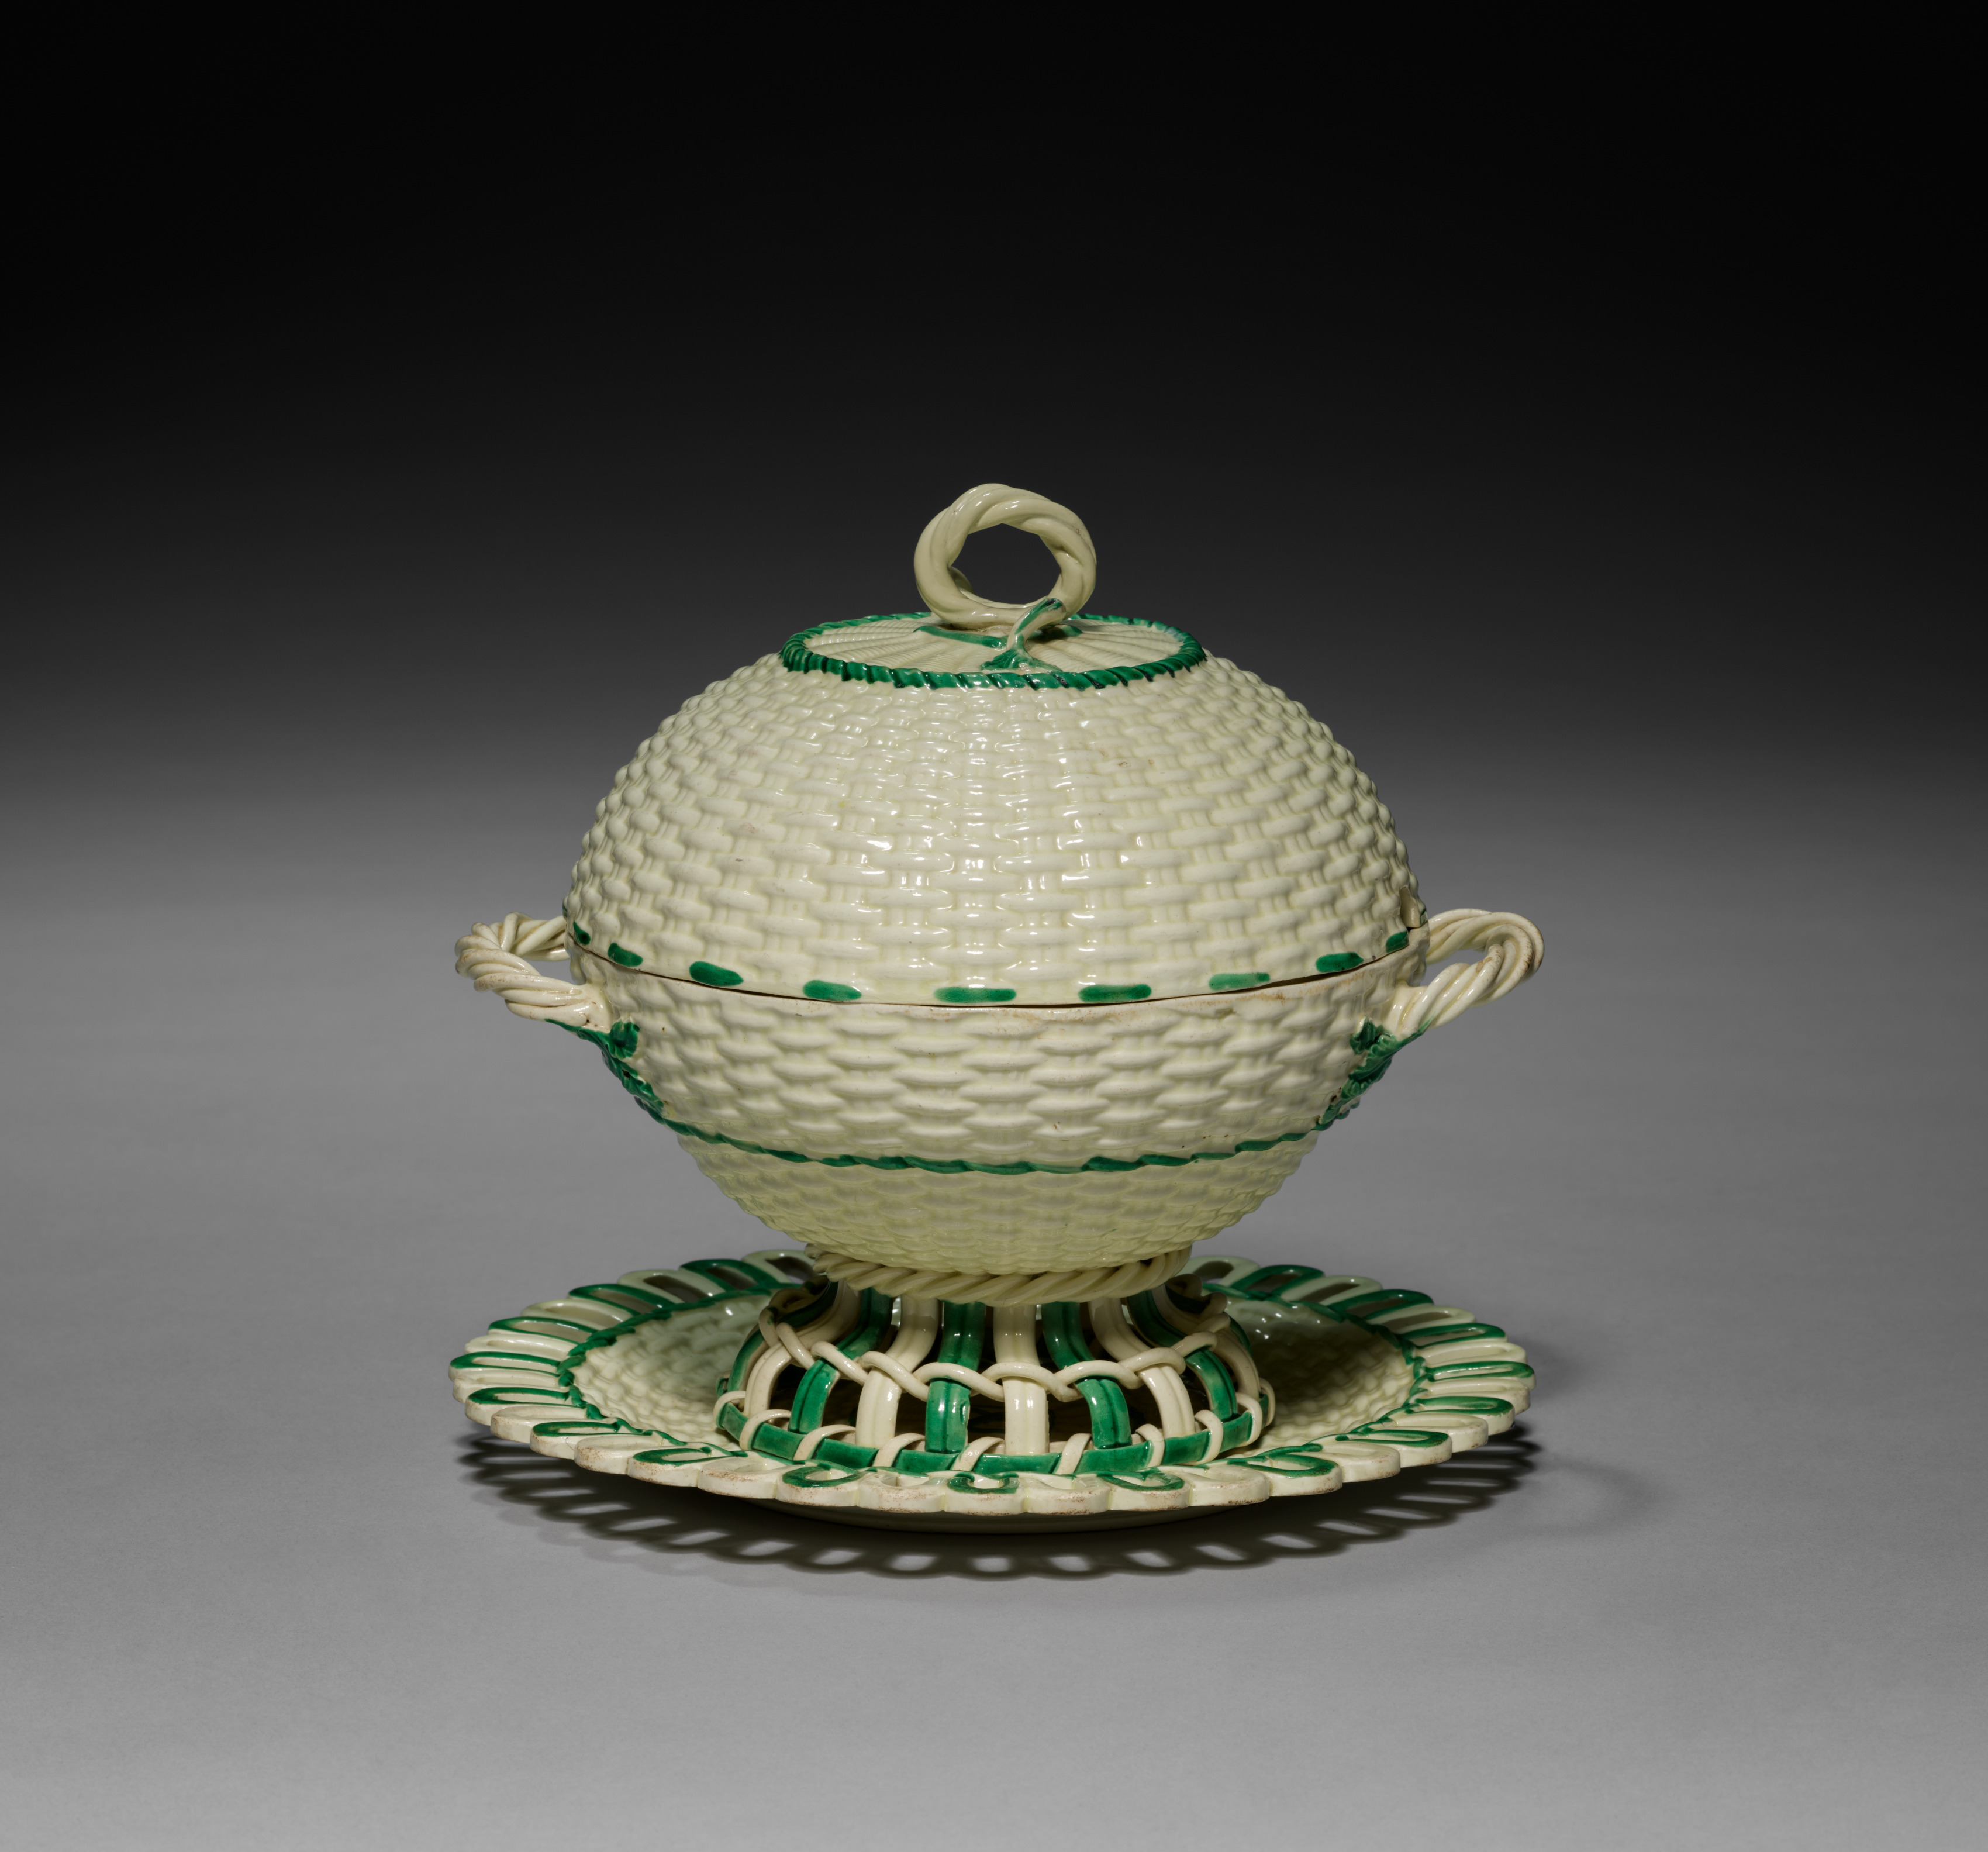 Wicker-Work Covered Sauce Tureen on Stand